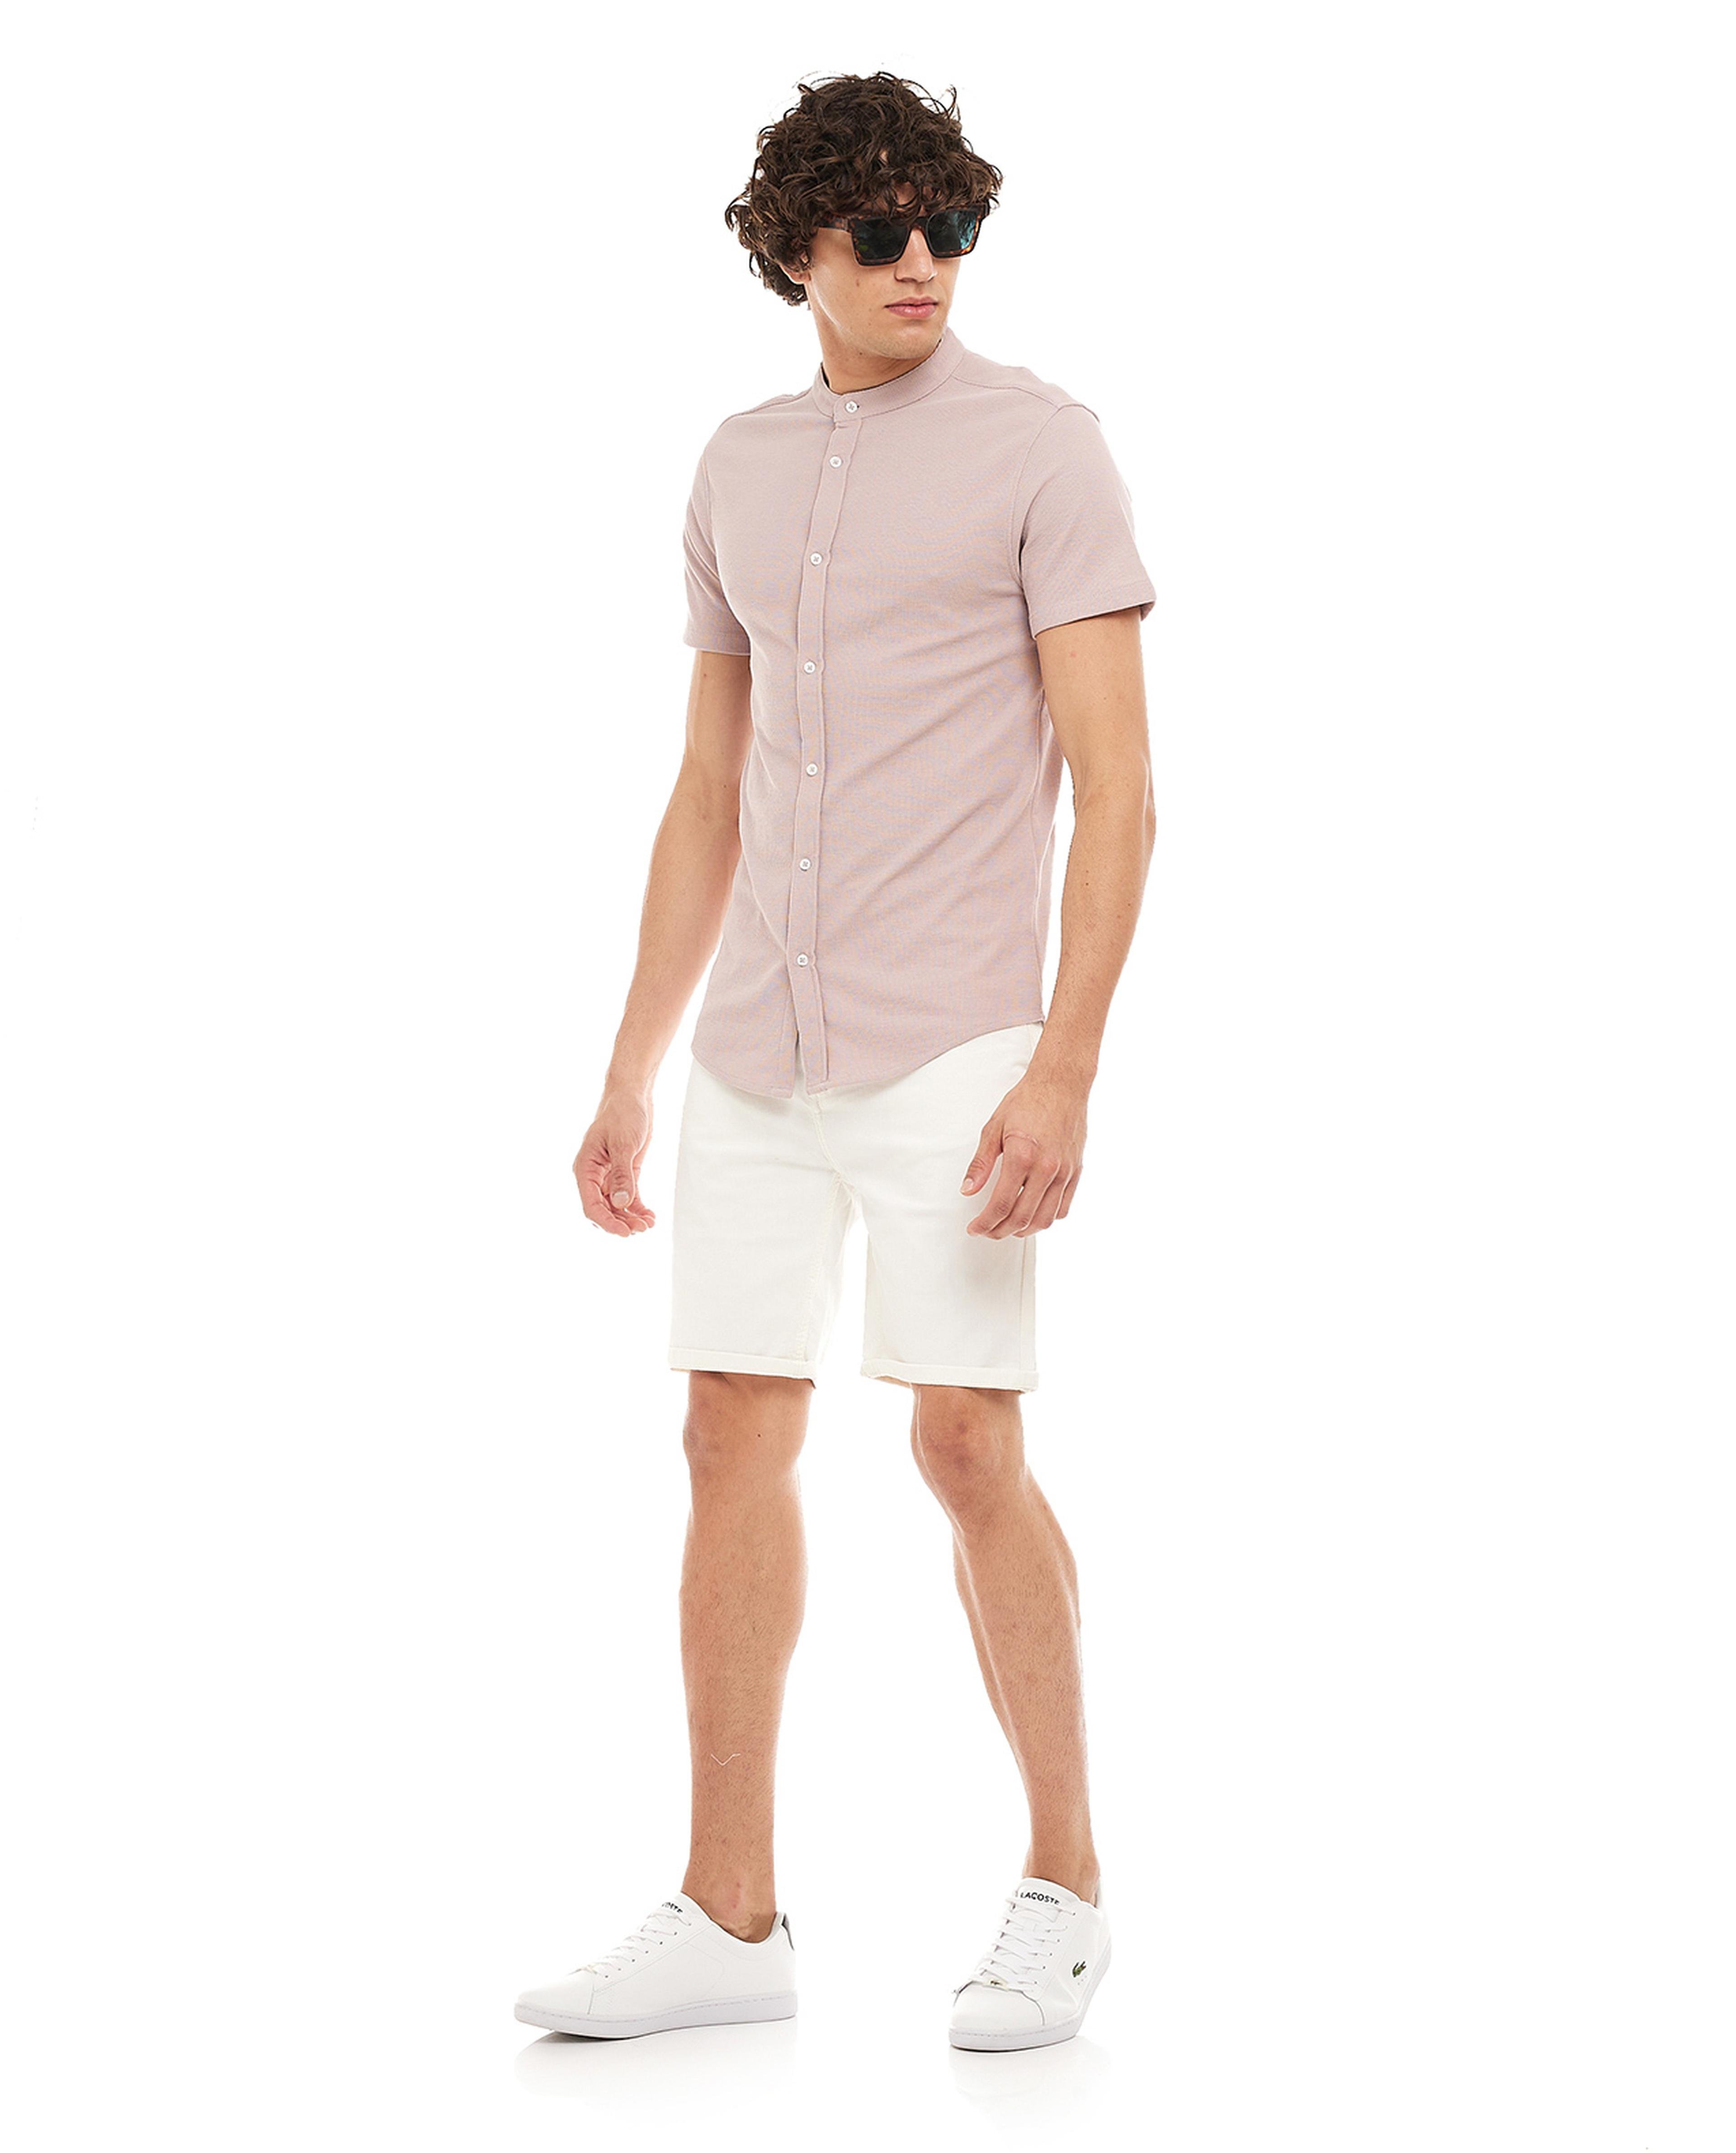 Solid Shorts with Button Closure